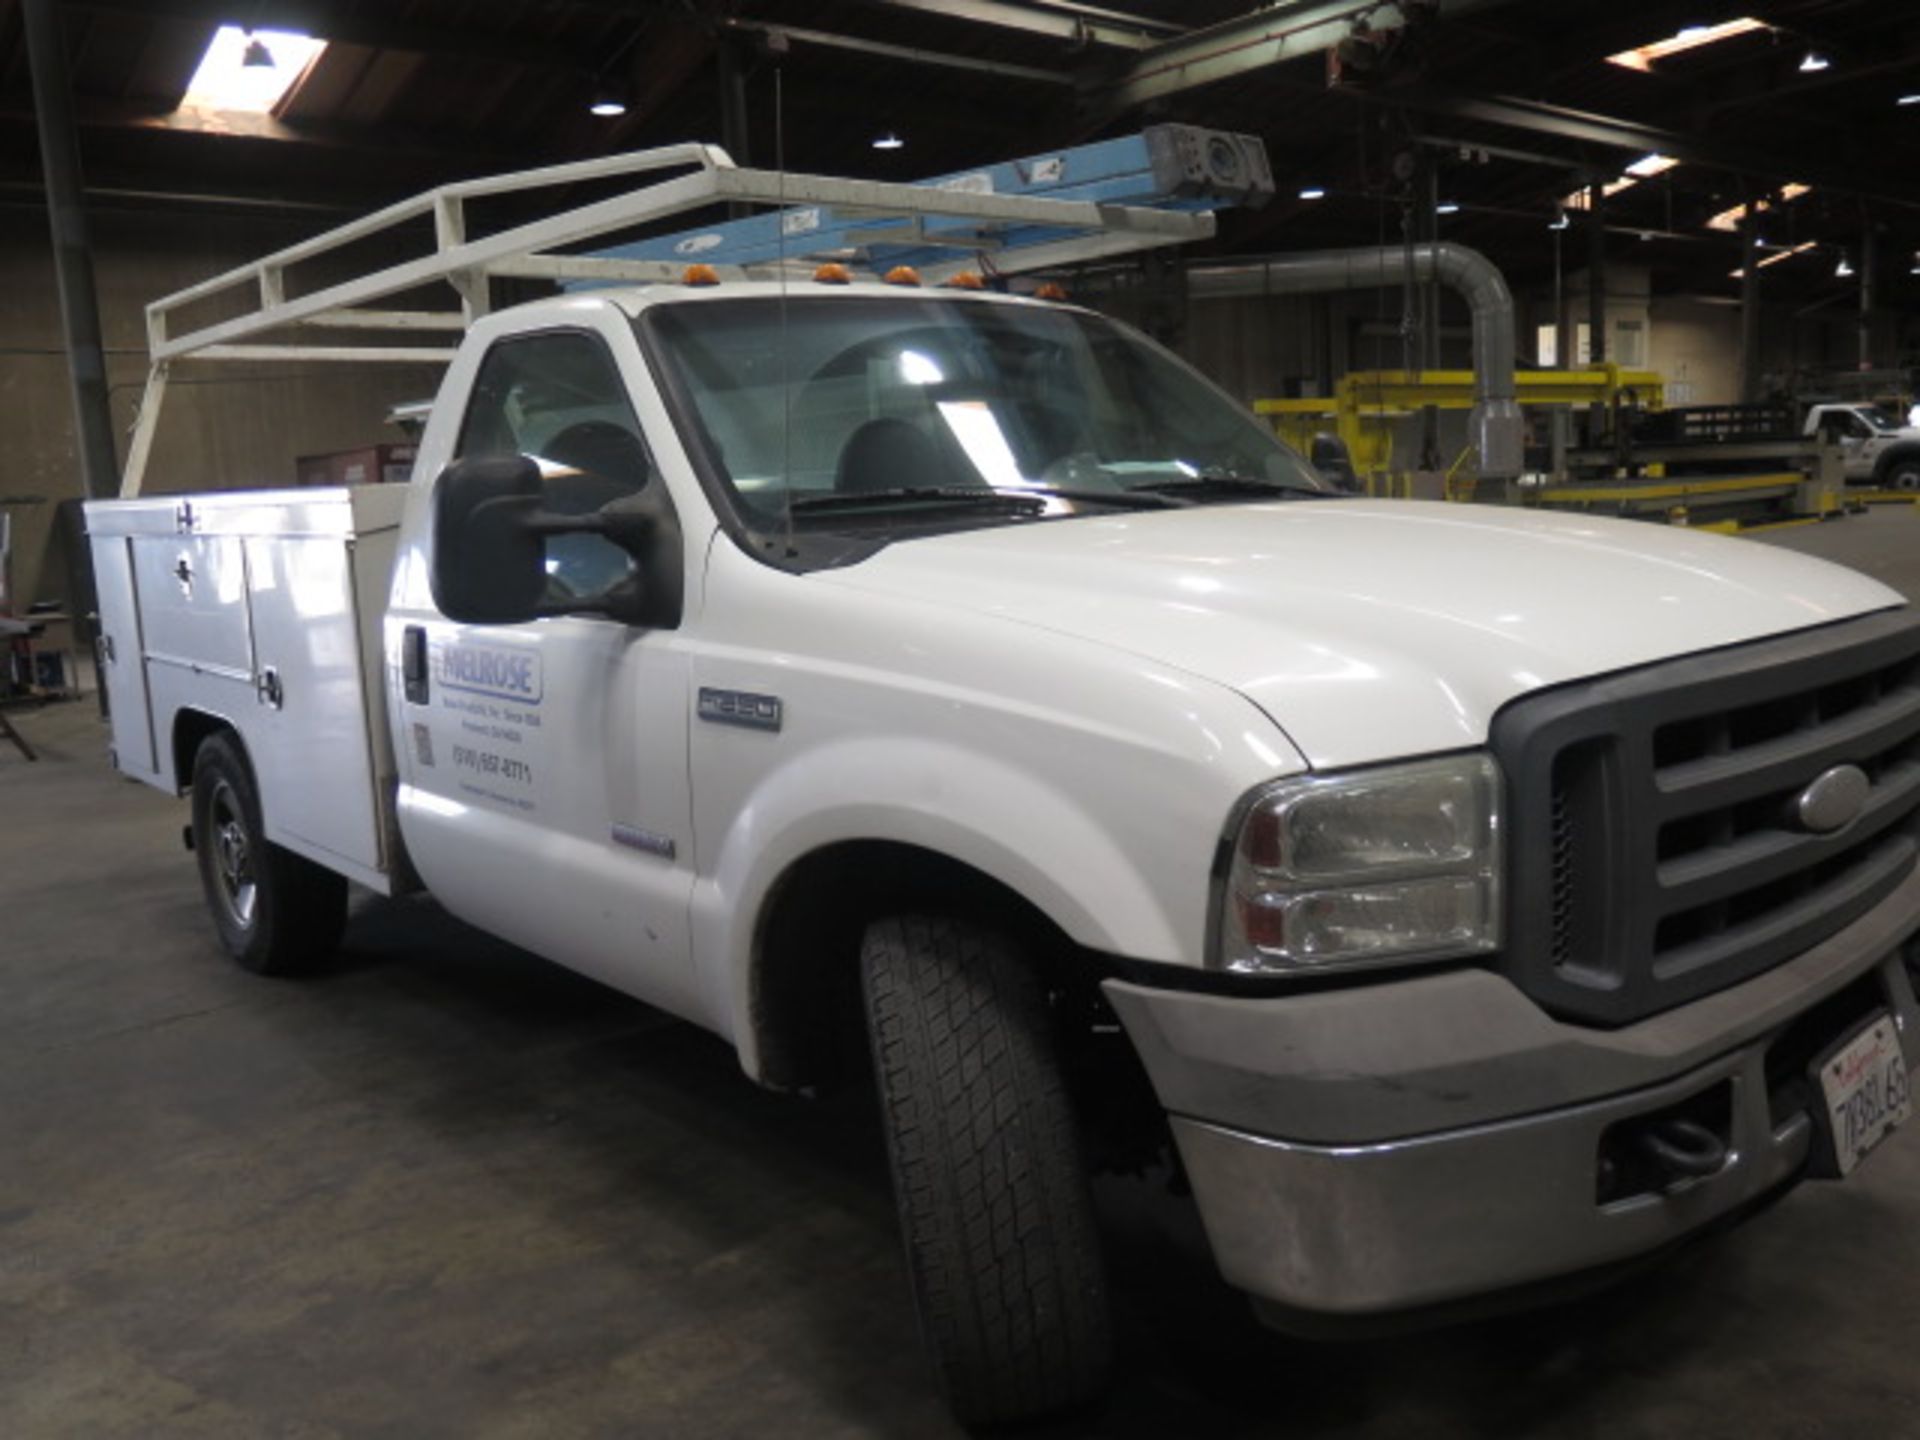 2005 Ford F-350 Service Truck Lisc 7N38165 w/ 6.0L V8 Turbo Diesel Engine, Auto Trans, SOLD AS IS - Image 3 of 23